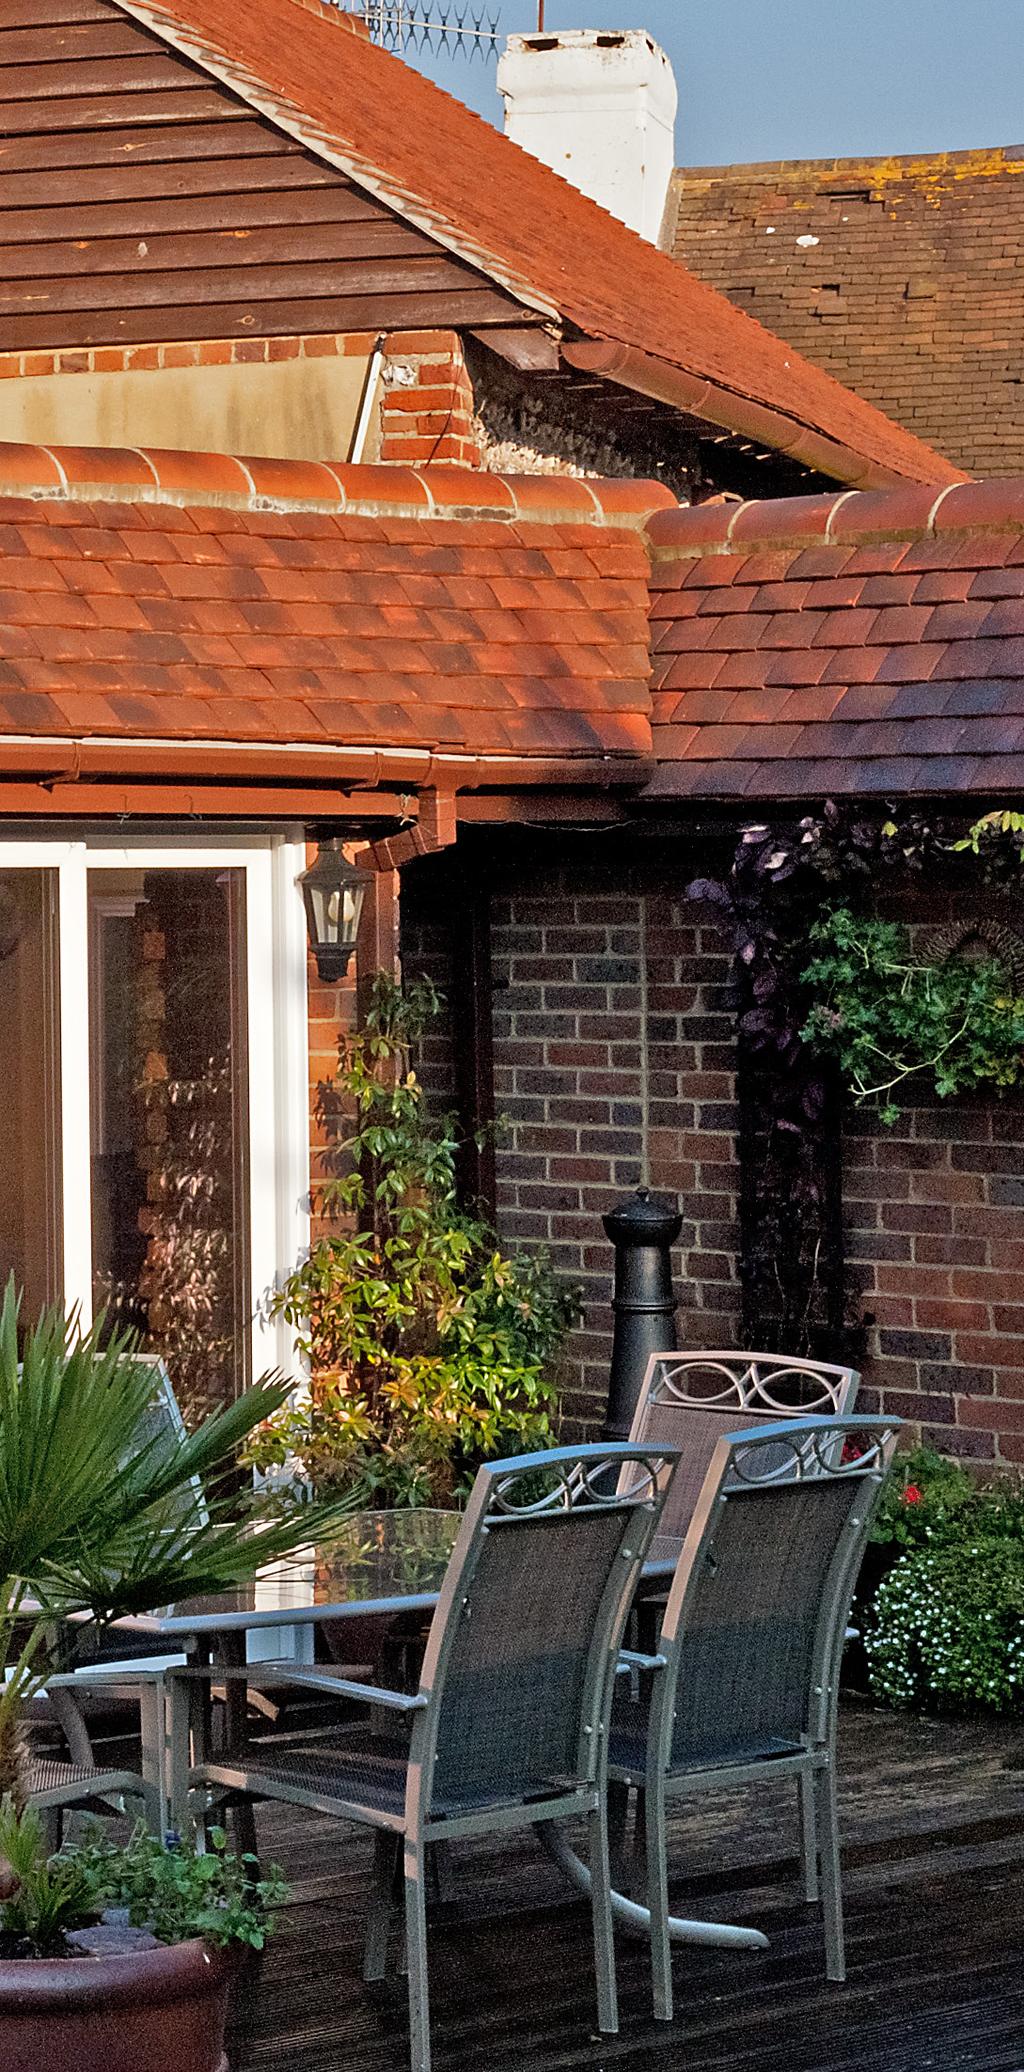 A grand design Sliding patio doors are ideal for providing access to garden areas or conservatories, offering a generous expanse of light through large glazed panels.